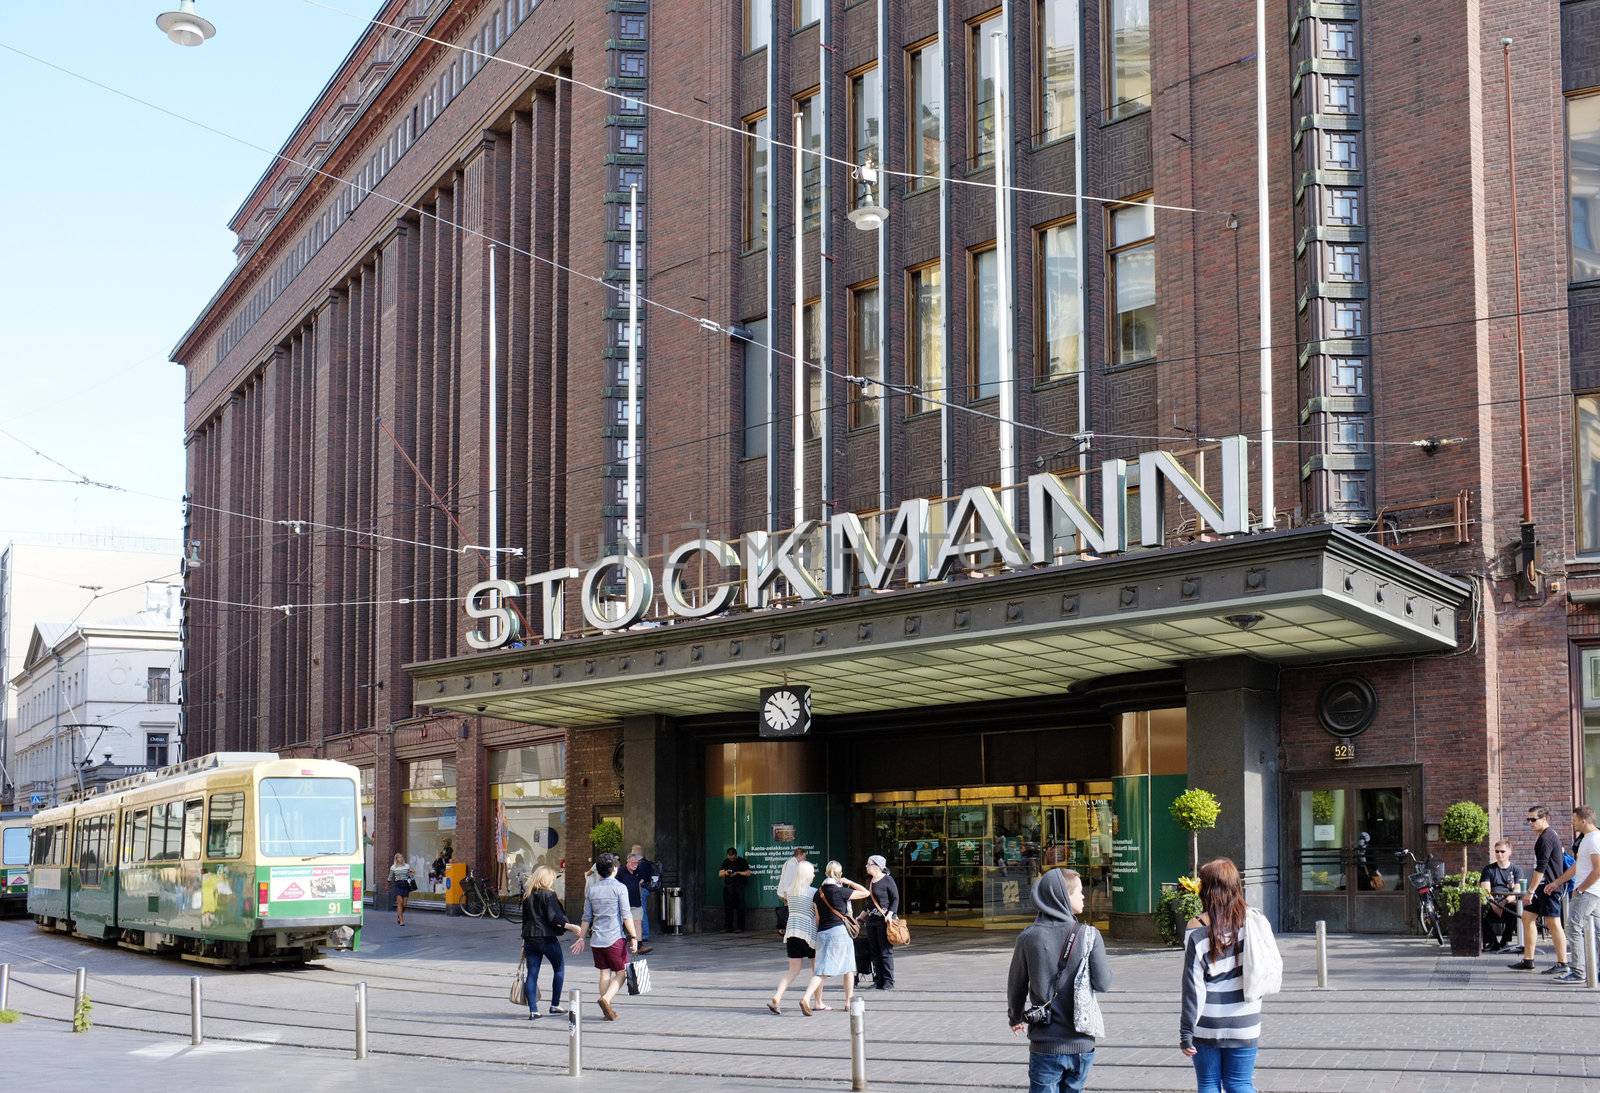 Stockmann by Stocksnapper